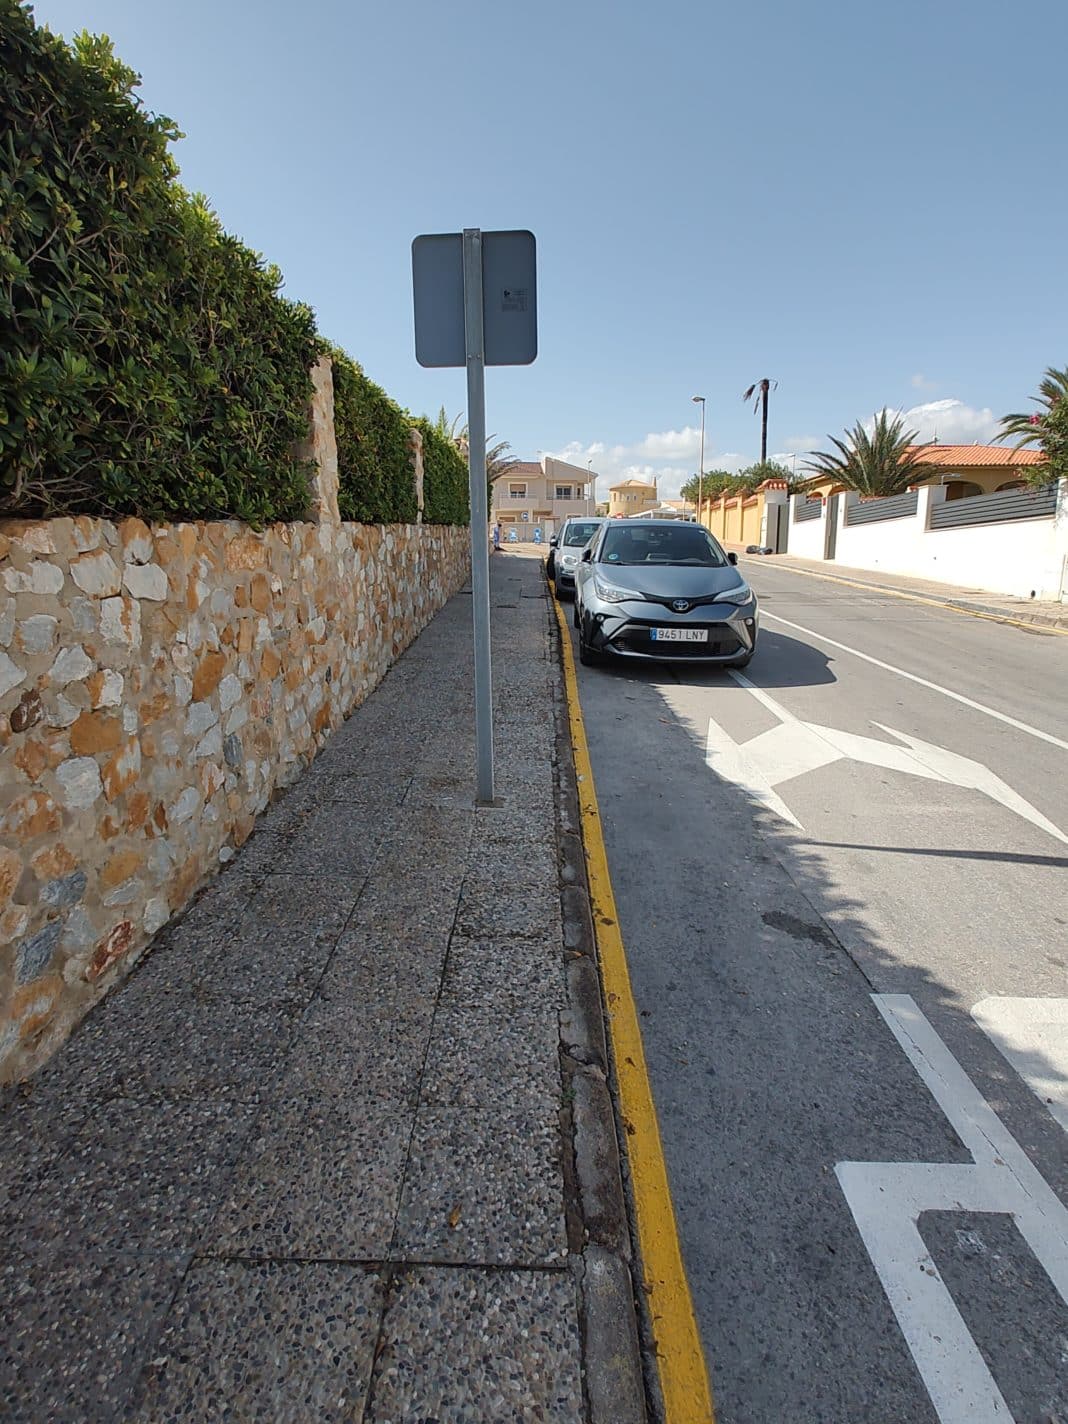 Motorists continue to ignore parking restrictions in La Zenia